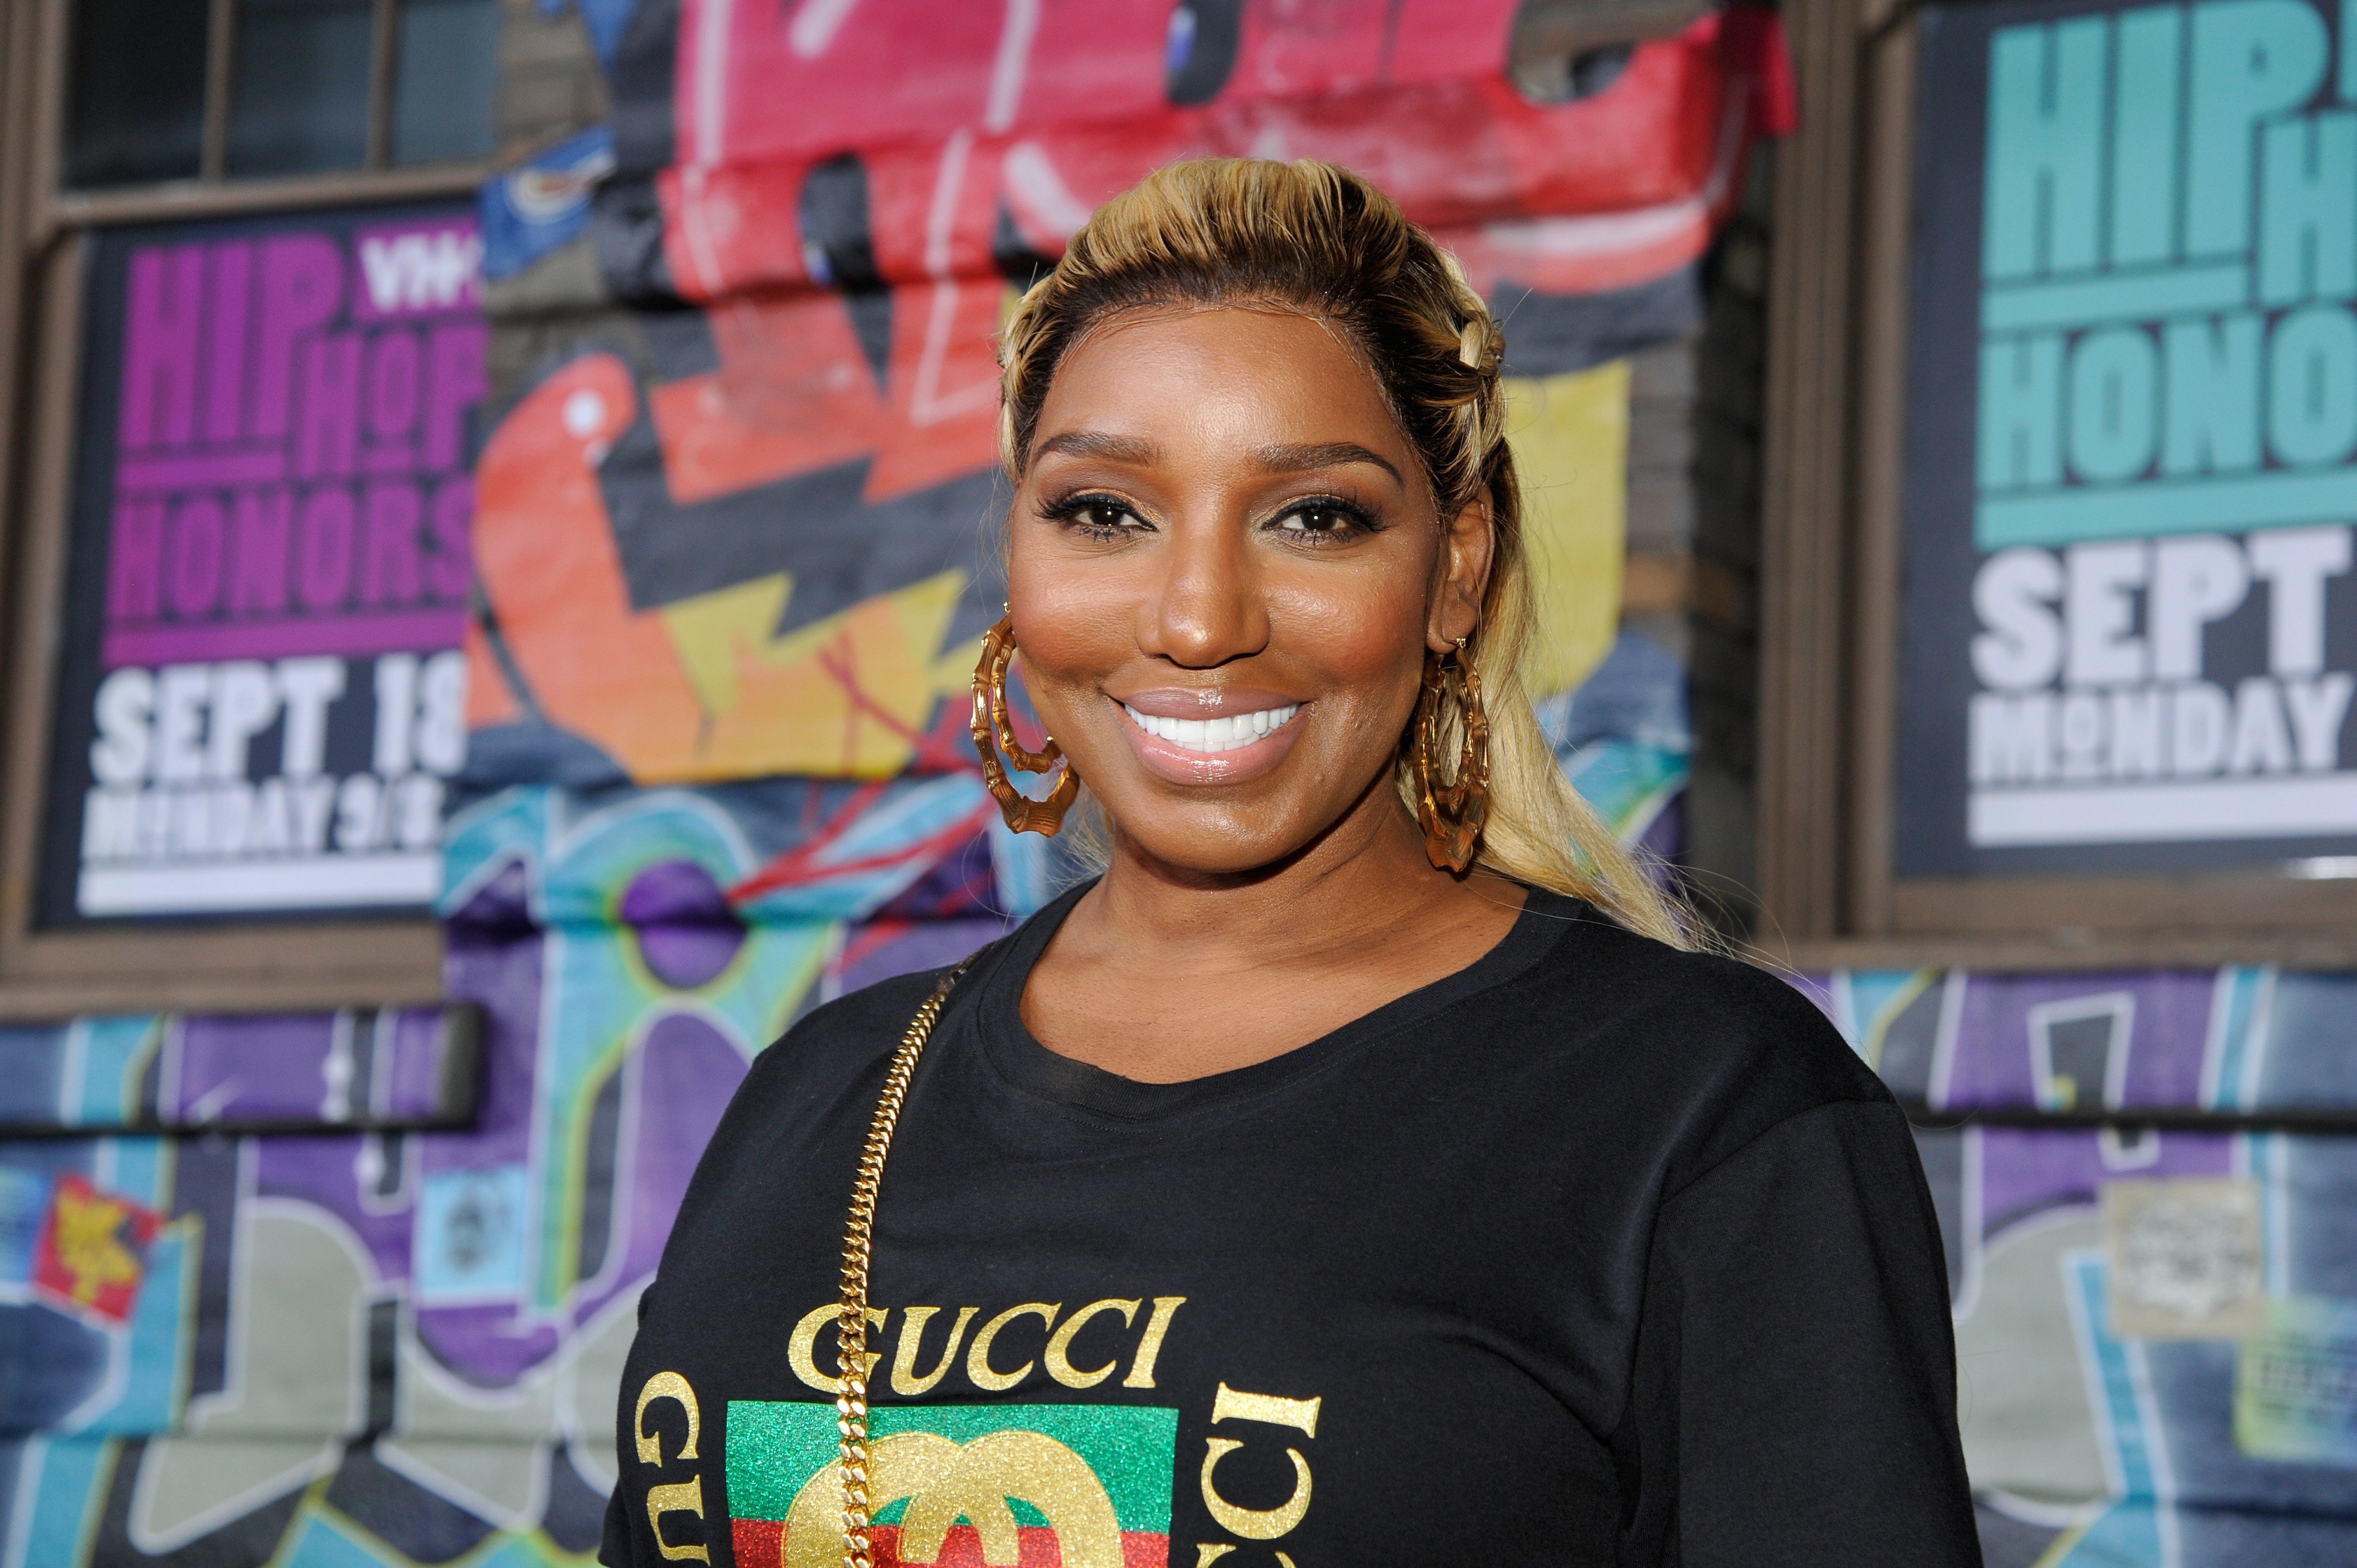 NeNe Leakes at the VH1 Hip Hop Honors: The 90s Game Changers on Sept. 17, 2017 in California | Photo: Getty Images